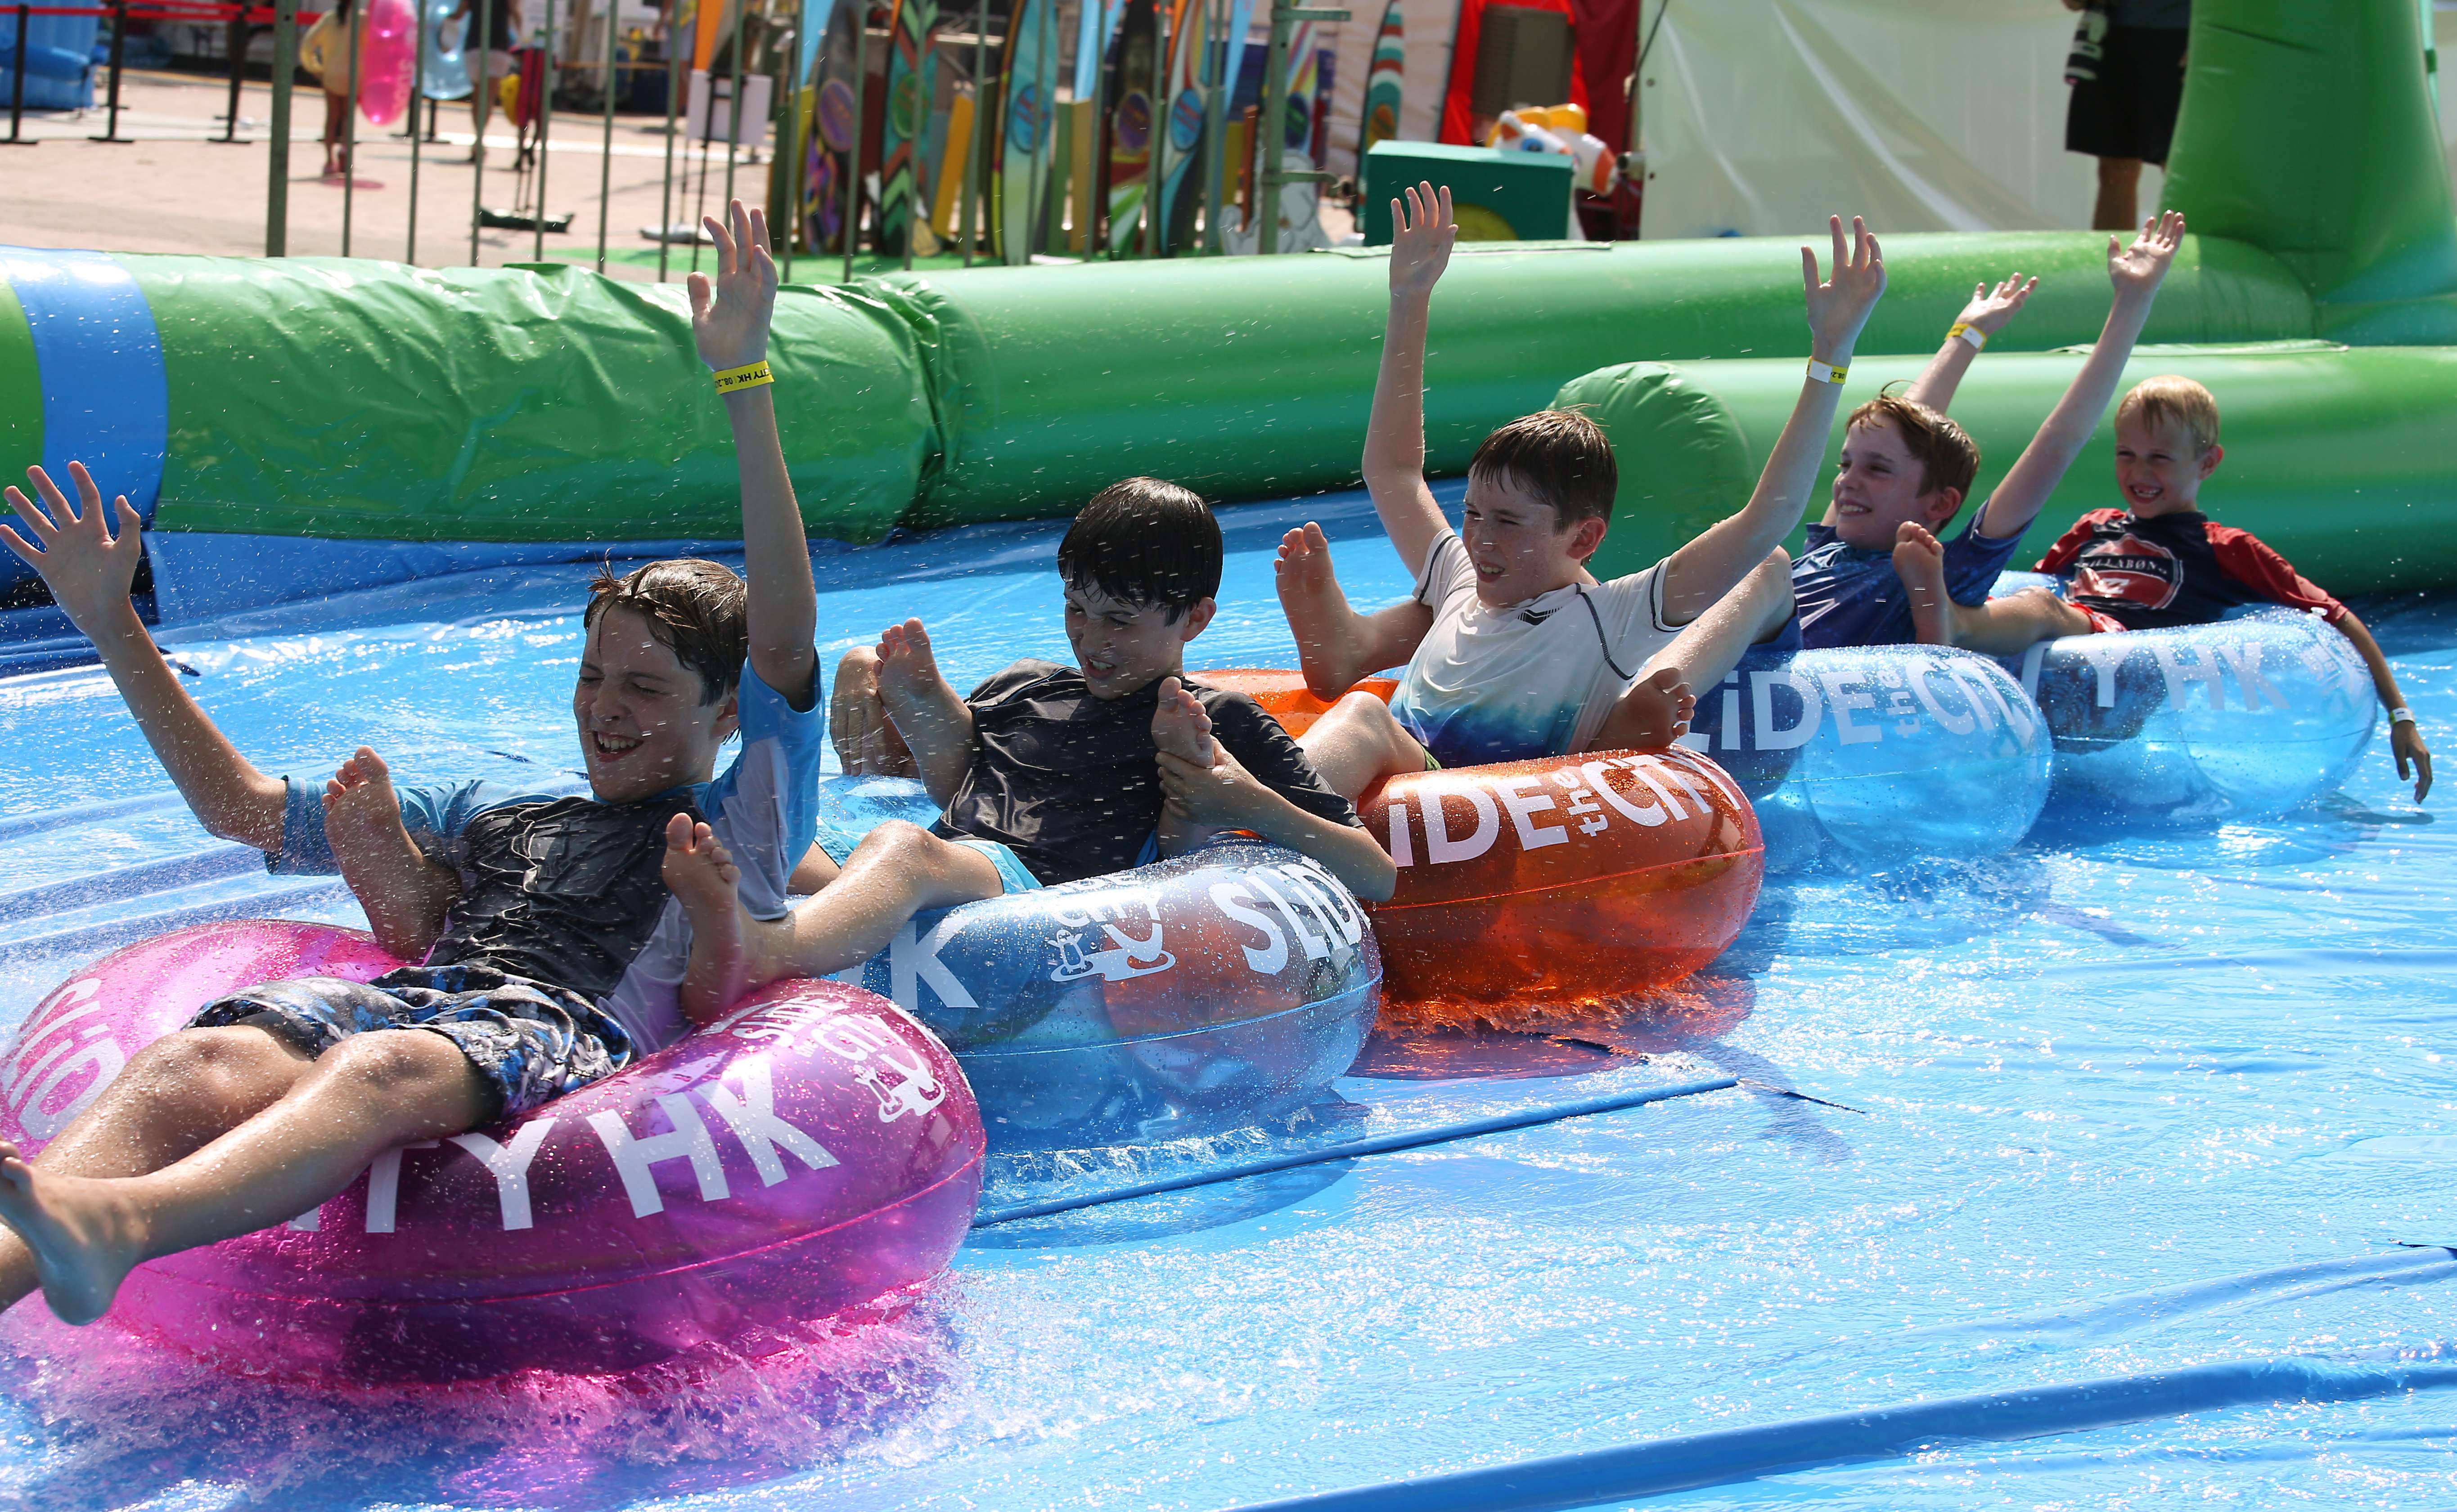 Youngsters beat the heat on the 10-metre slide. Photo: Nora Tam